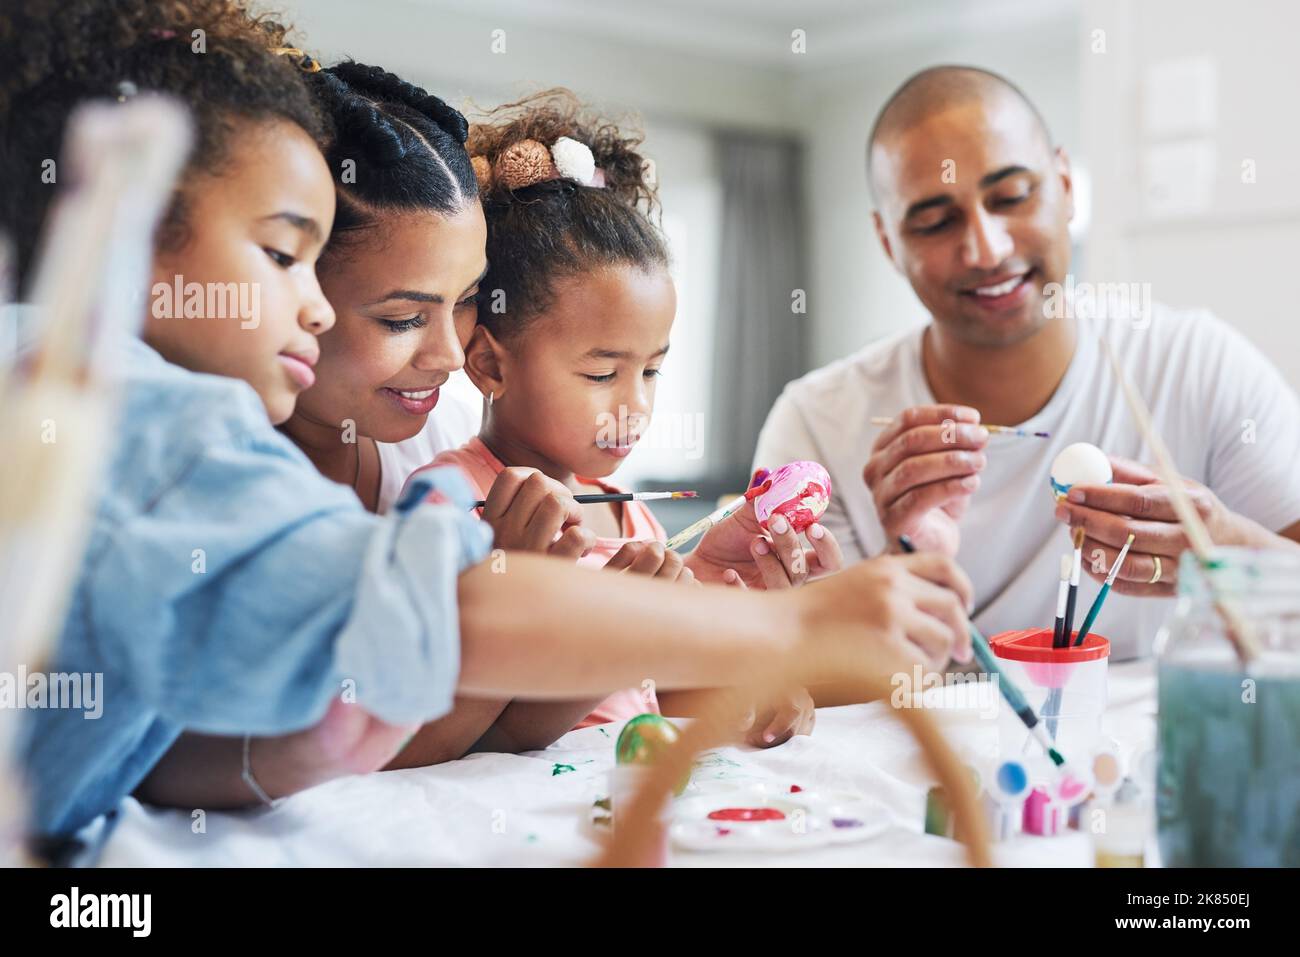 Seeing family is a important part of my weekend. a mother and father painting eggs with their daughter at home. Stock Photo